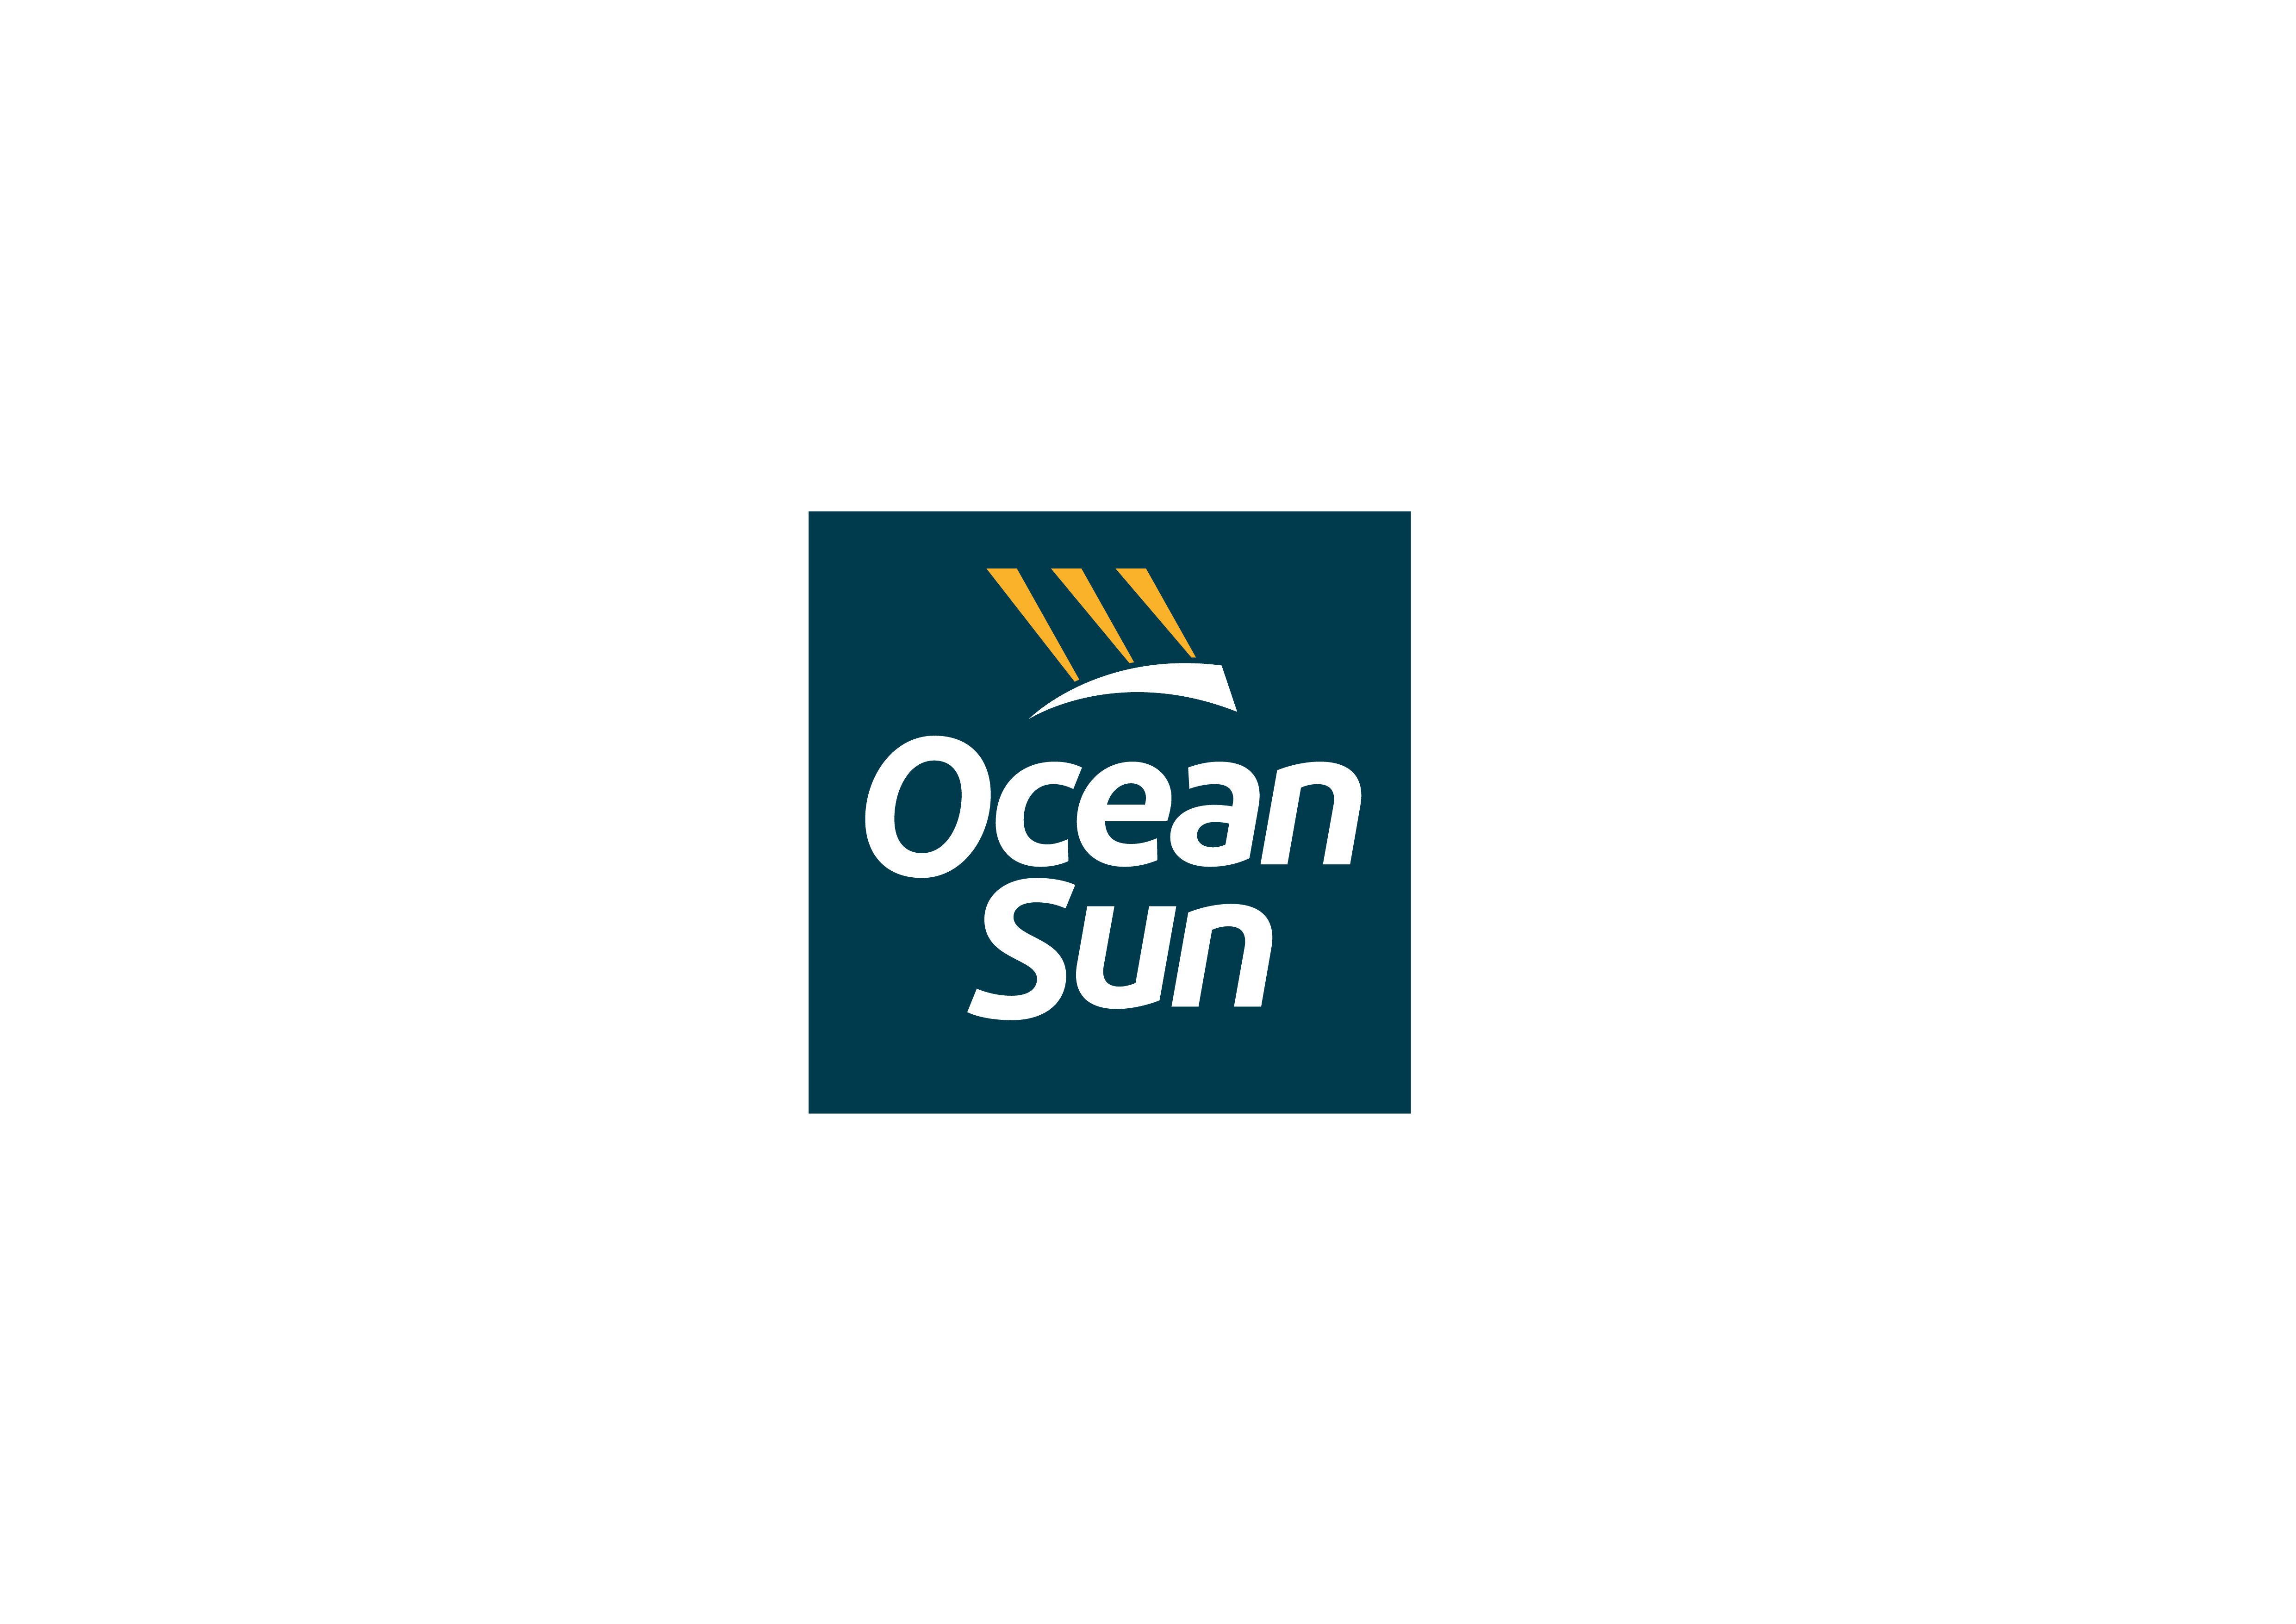 24-26 October: Ocean Sun attends Asia Clean Energy Summit 2017 in Singapore